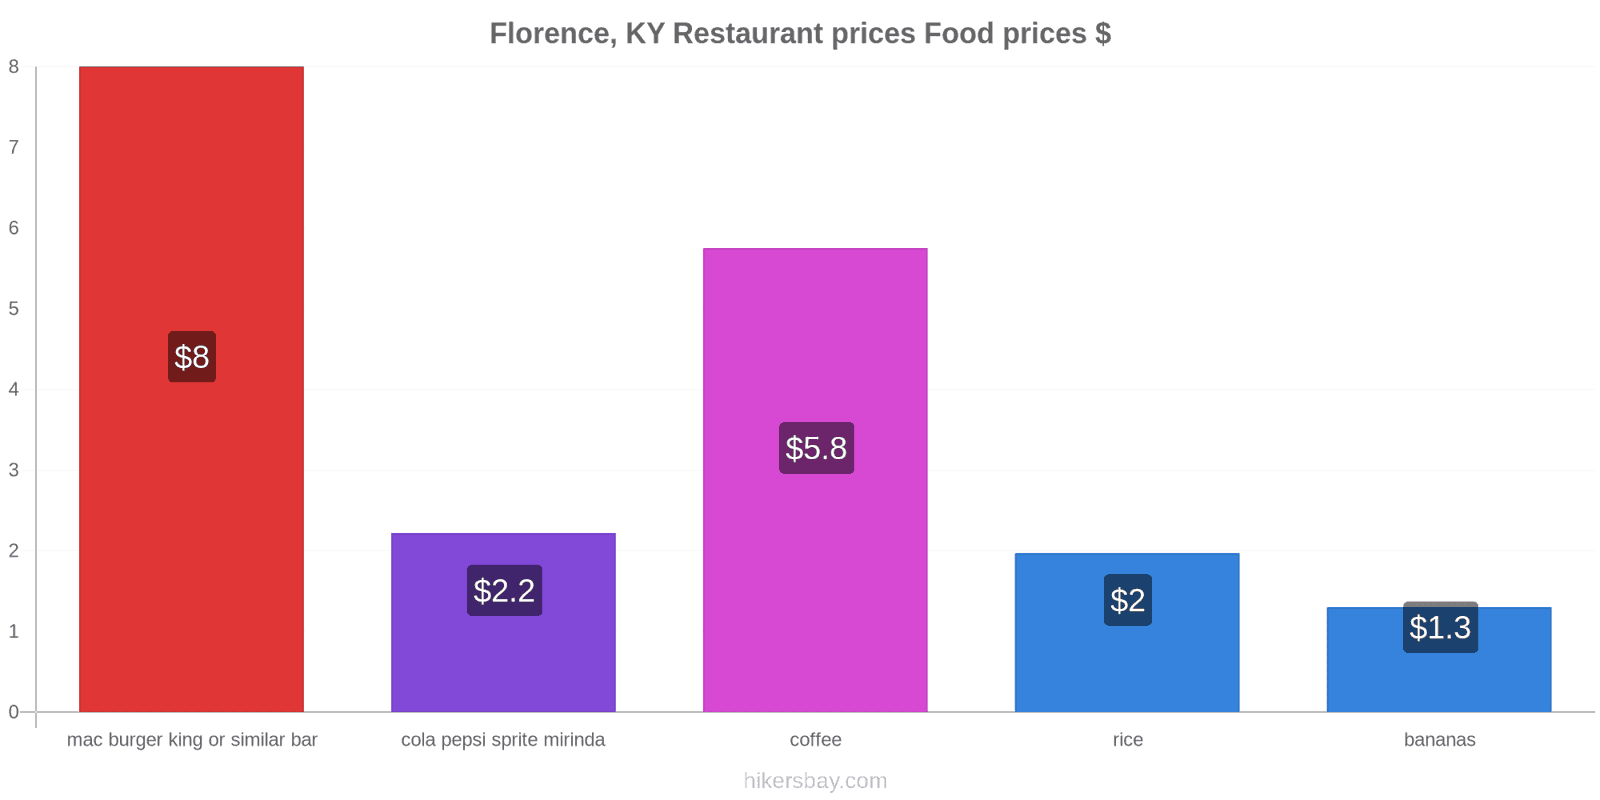 Florence, KY price changes hikersbay.com